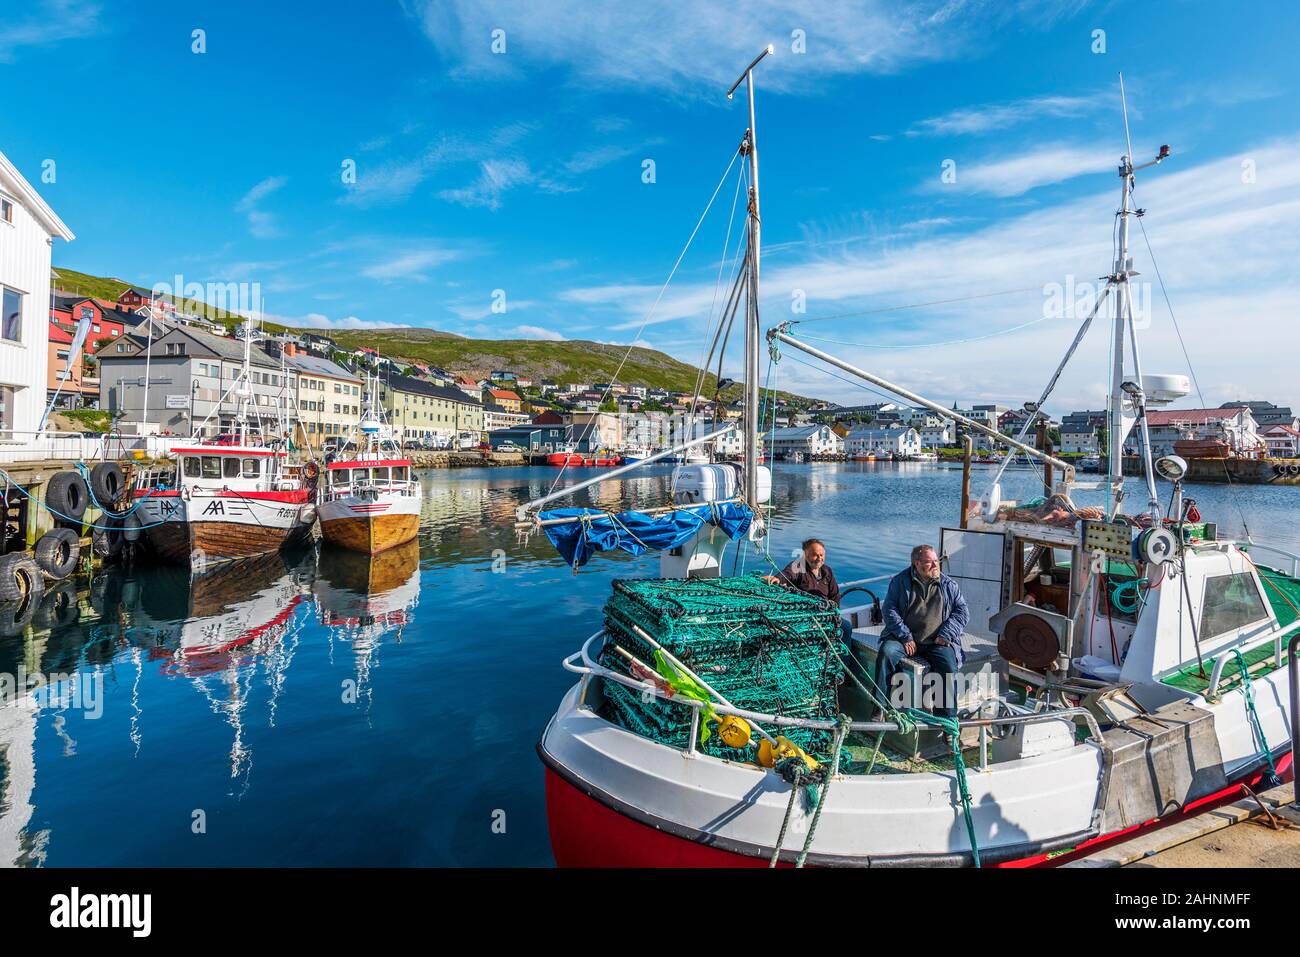 Honningsvag, Norway - August 10, 2017  Fishers boat with two fishmen in moored in the harbor of Honningsvag city in Mageroya island.  Nordkapp Municip Stock Photo